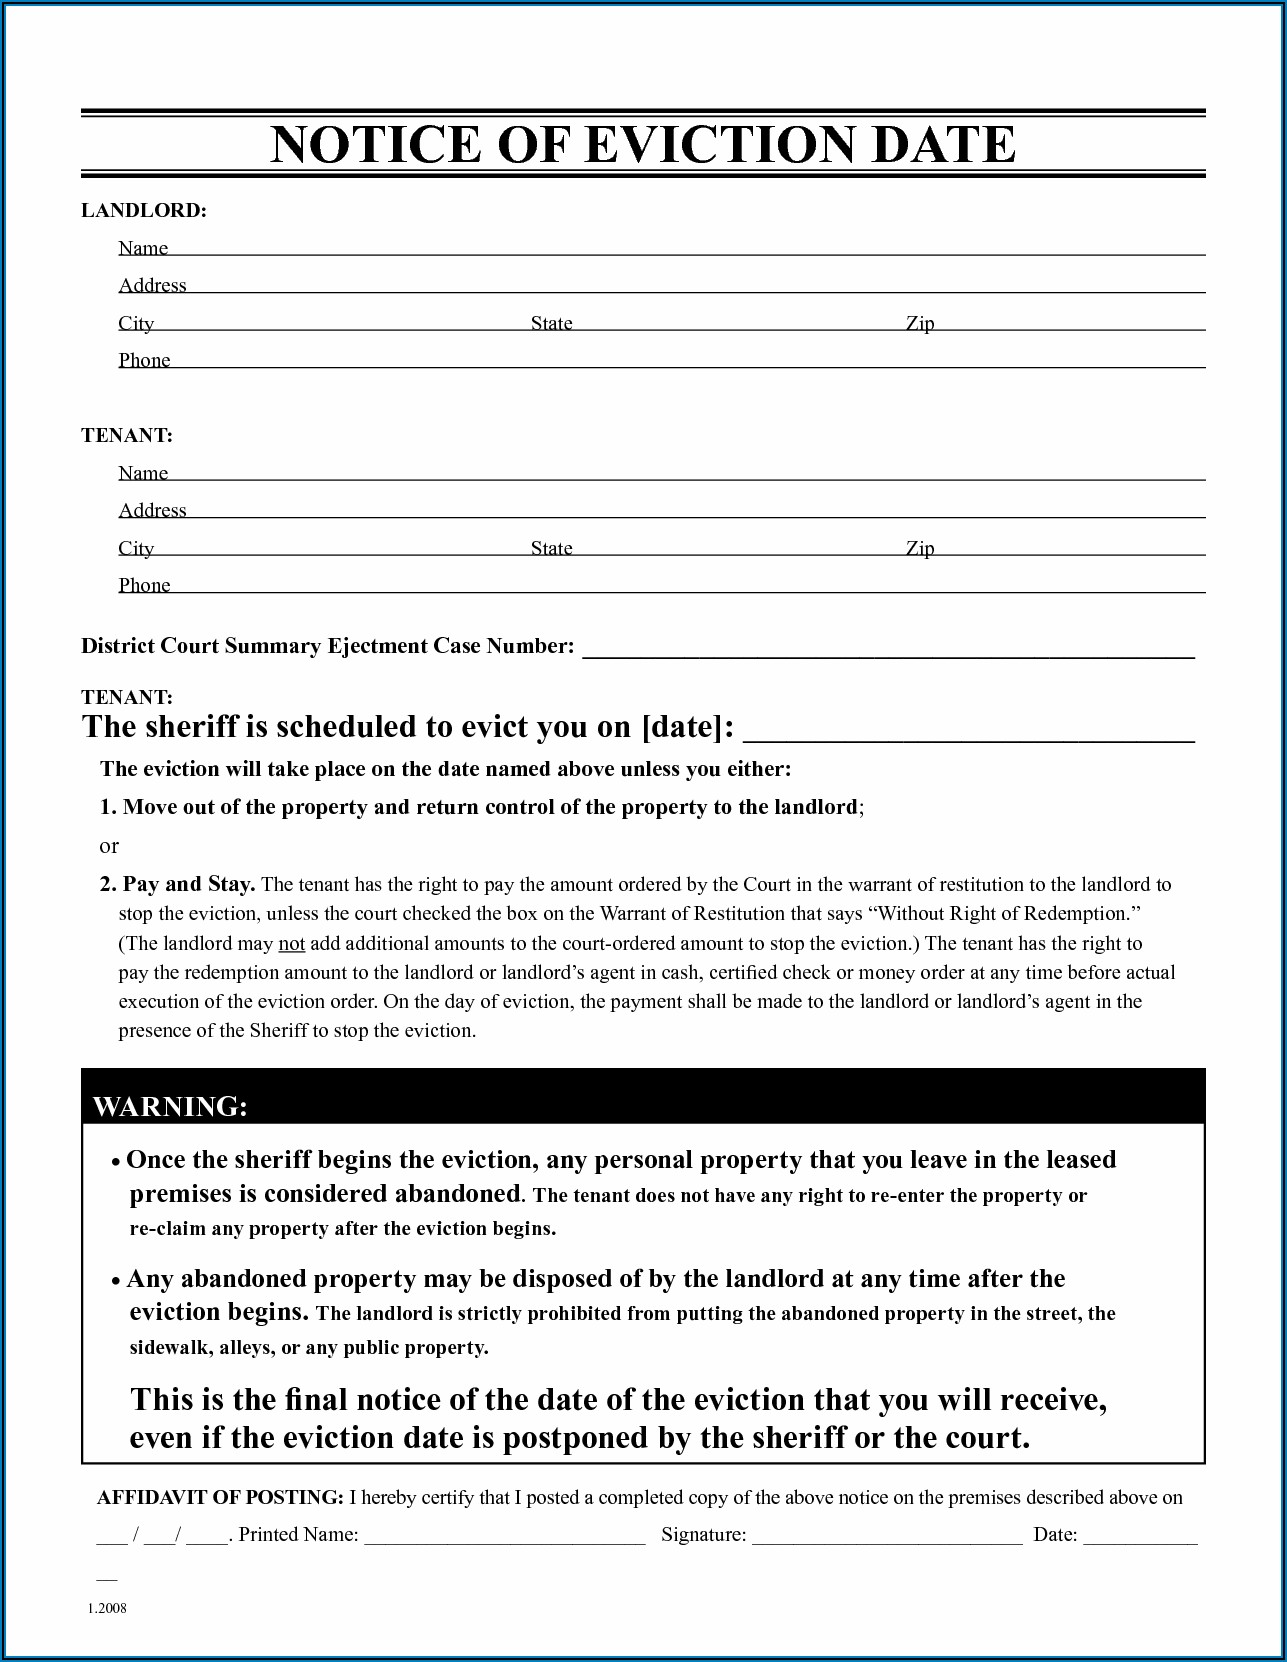 Free Eviction Notice Forms To Print Out